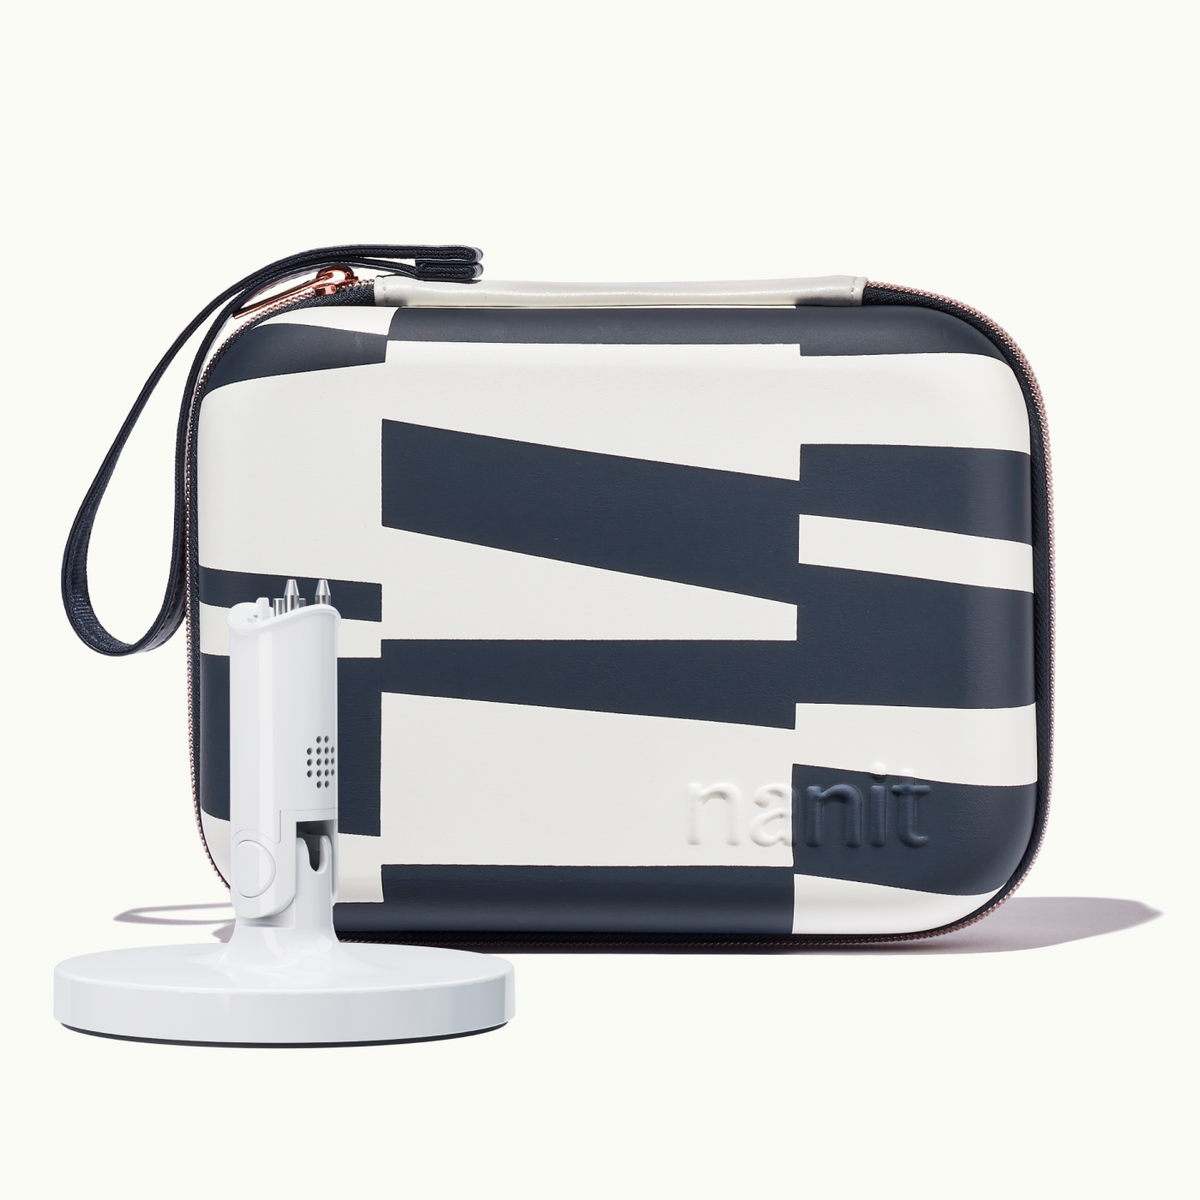 nanit flex stand and nanit abstract stripe travel case #color_abstract stripe